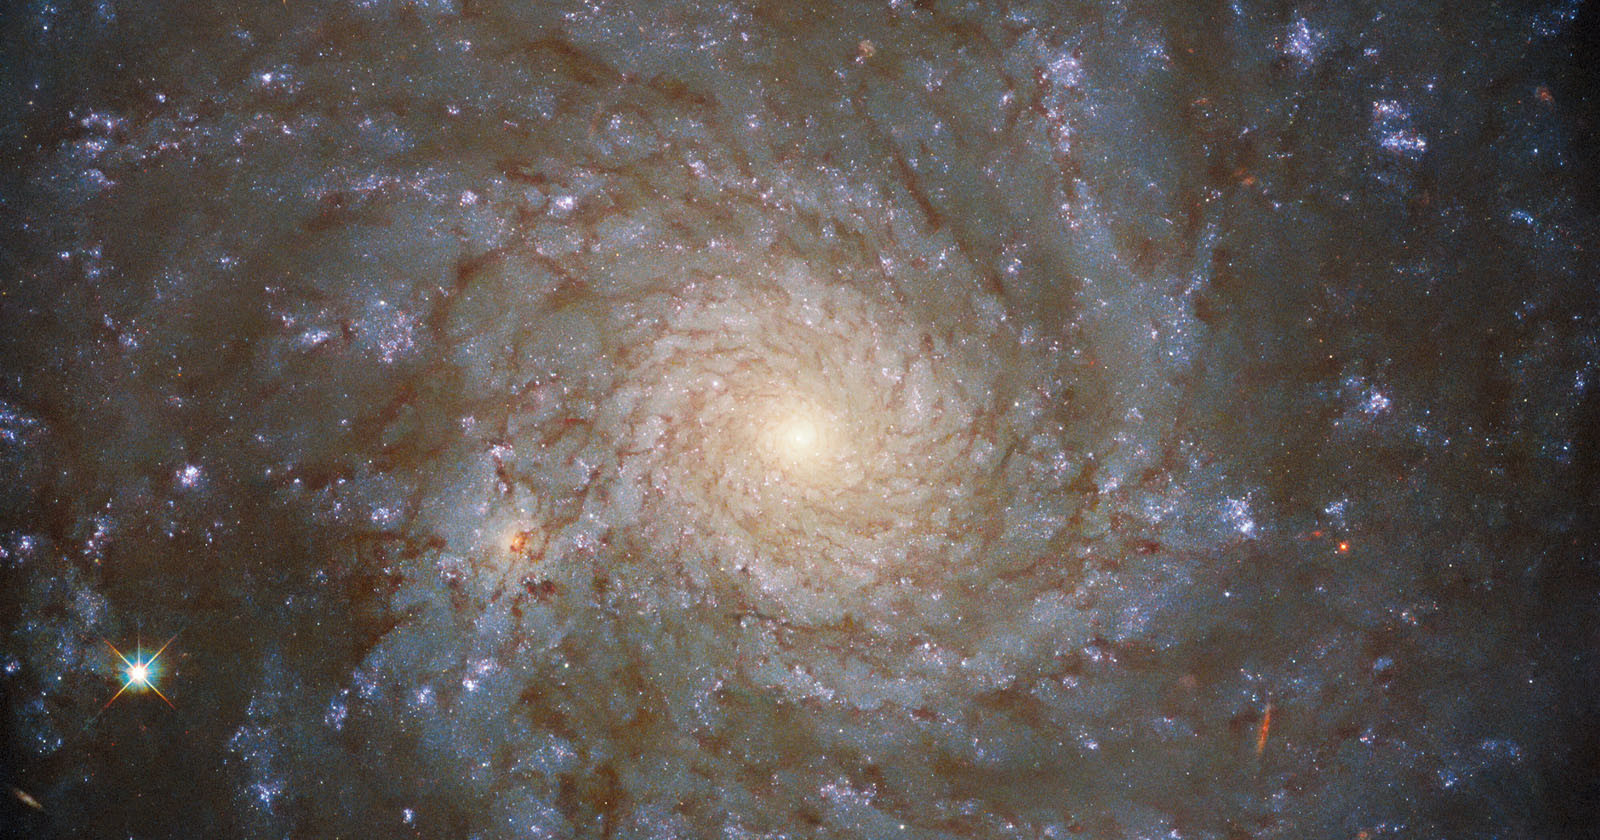  stunning spiral galaxy photographed hubble 